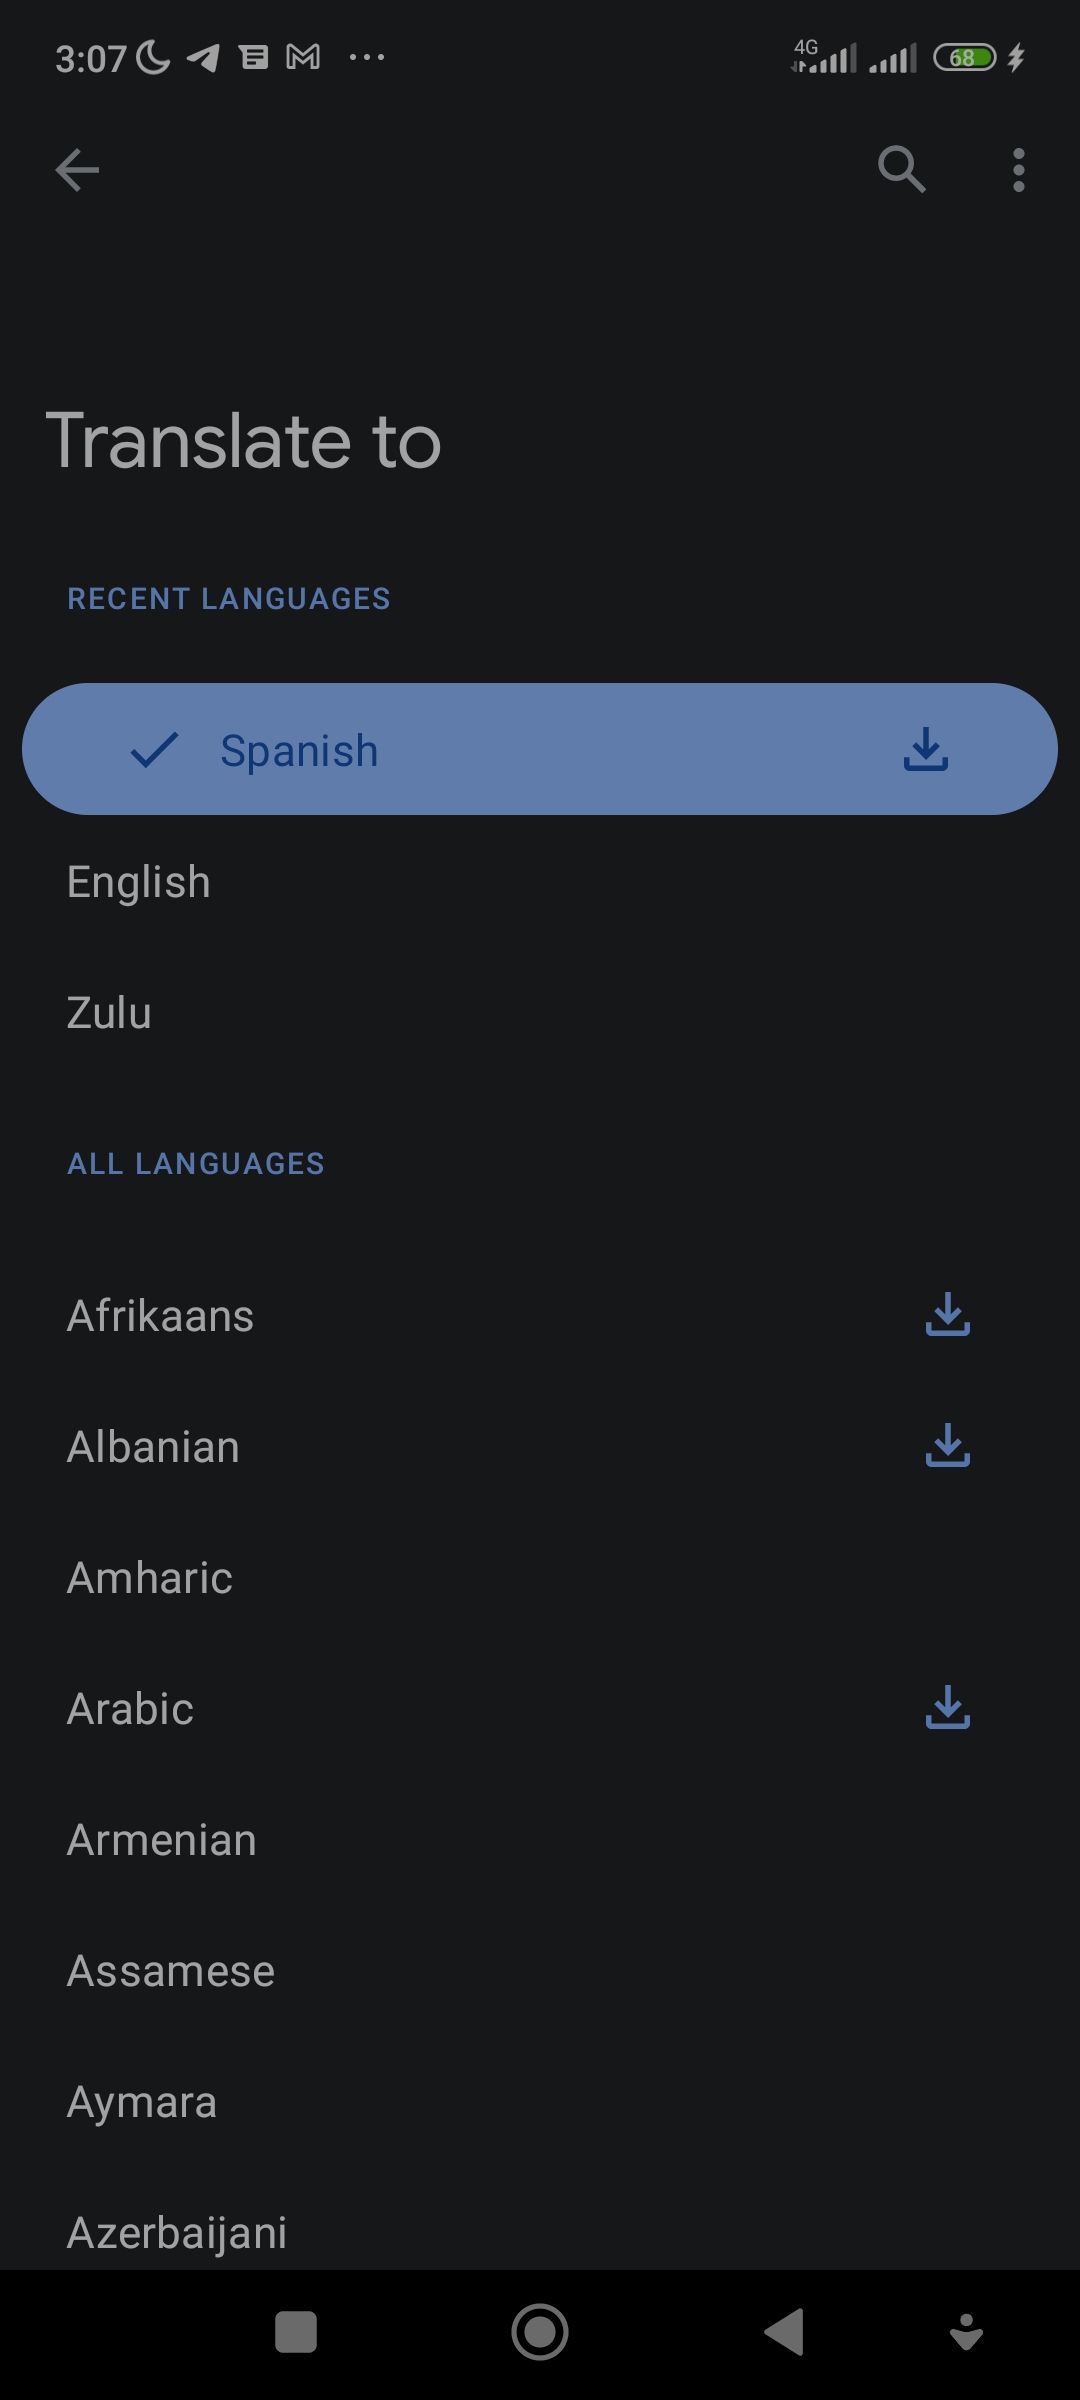 Select a language to translate in the Google Translate app